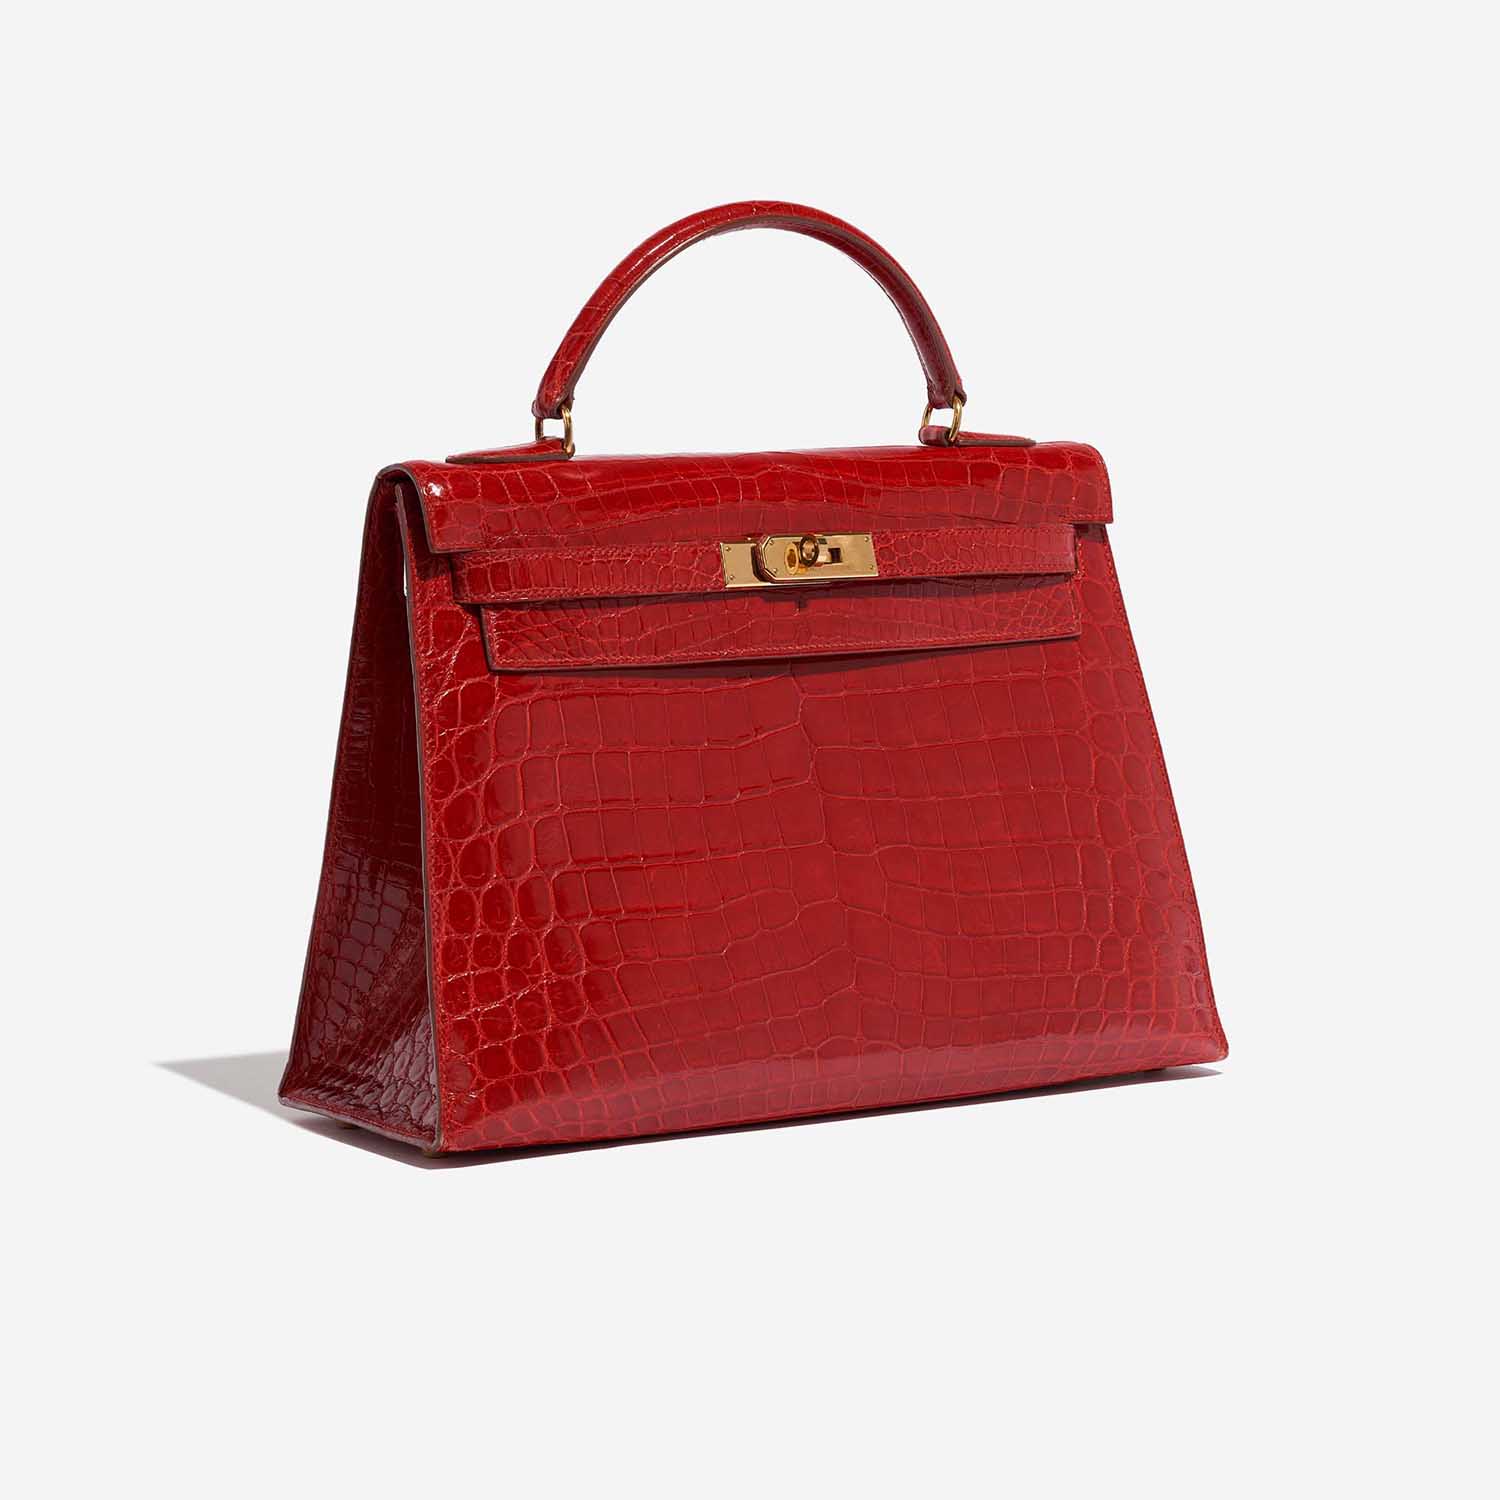 Pre-owned Hermès bag Kelly 32 Niloticus Crocodile Braise Red Side Front | Sell your designer bag on Saclab.com